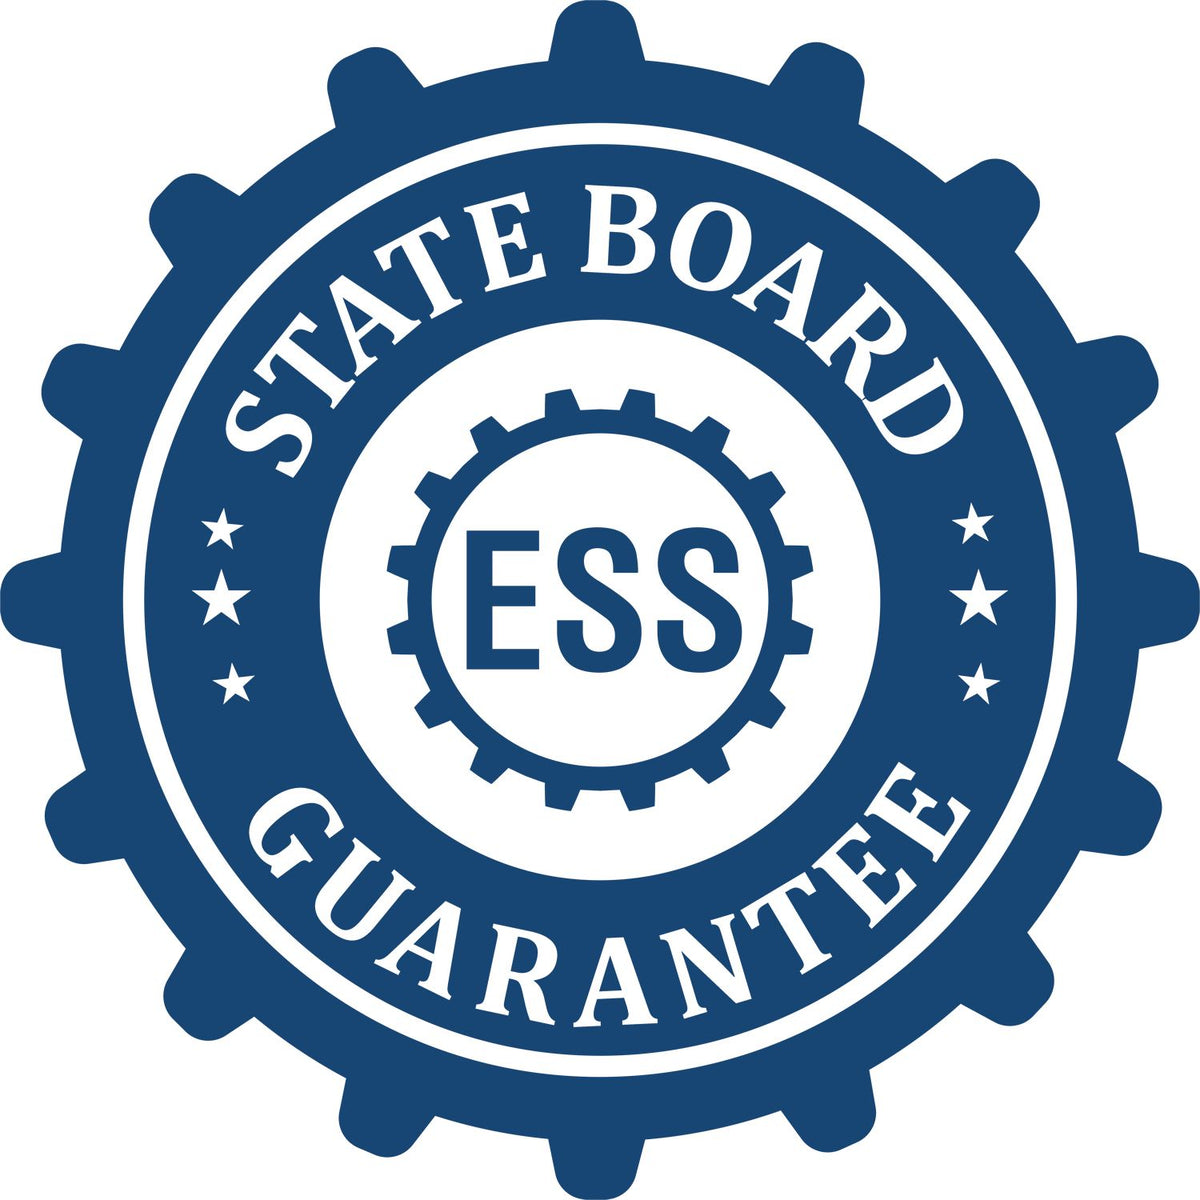 An emblem in a gear shape illustrating a state board guarantee for the Hybrid South Dakota Architect Seal